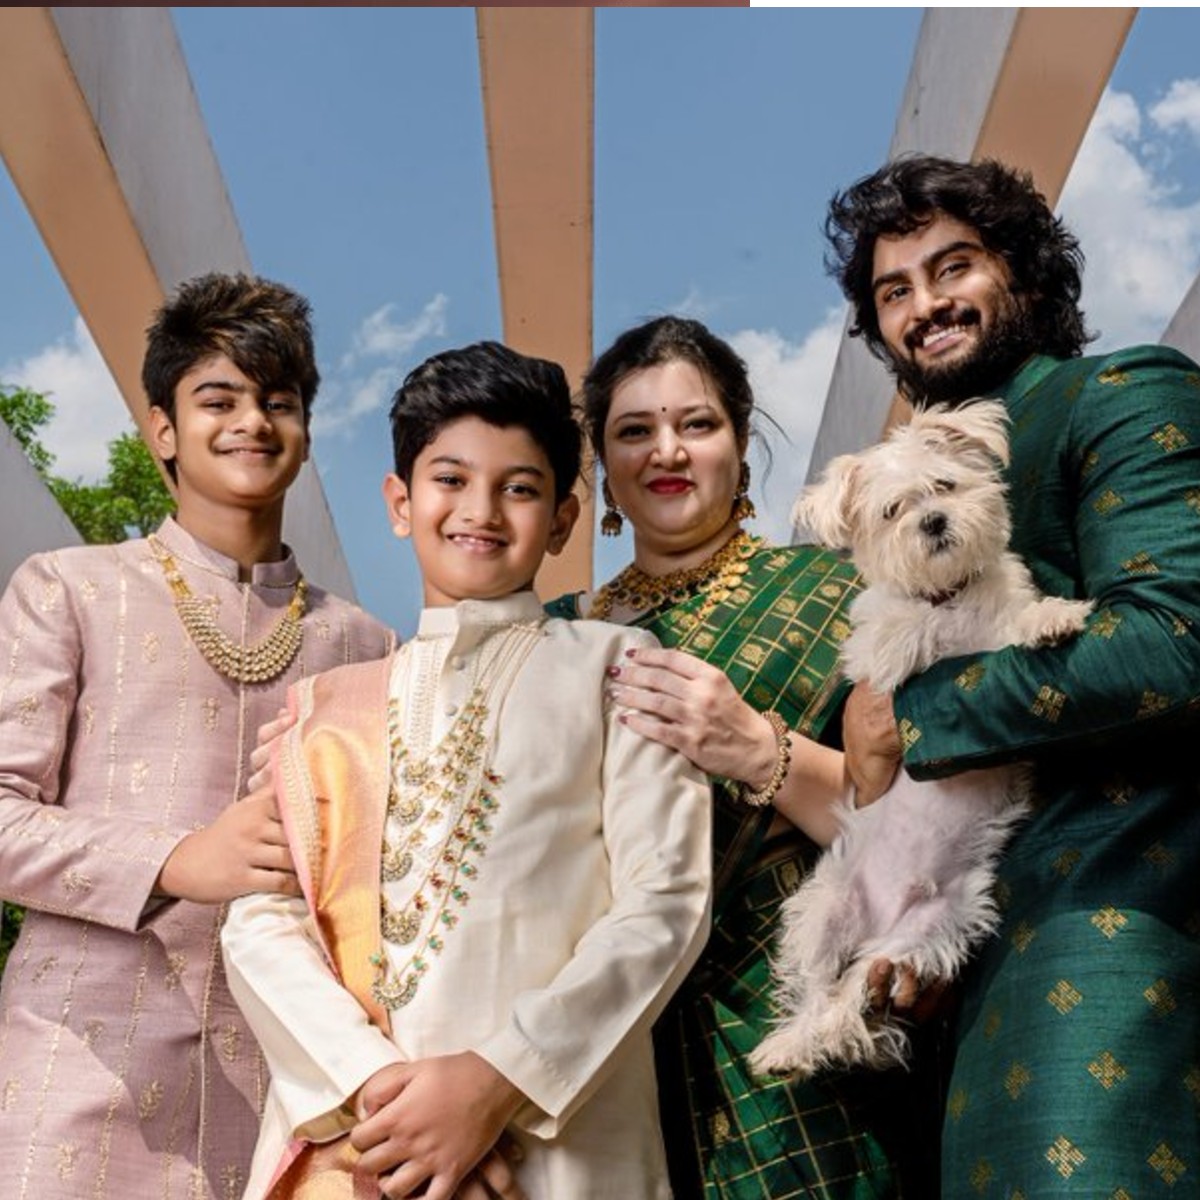 Sudheer Babu's latest PHOTOS with his family in traditional attire ...